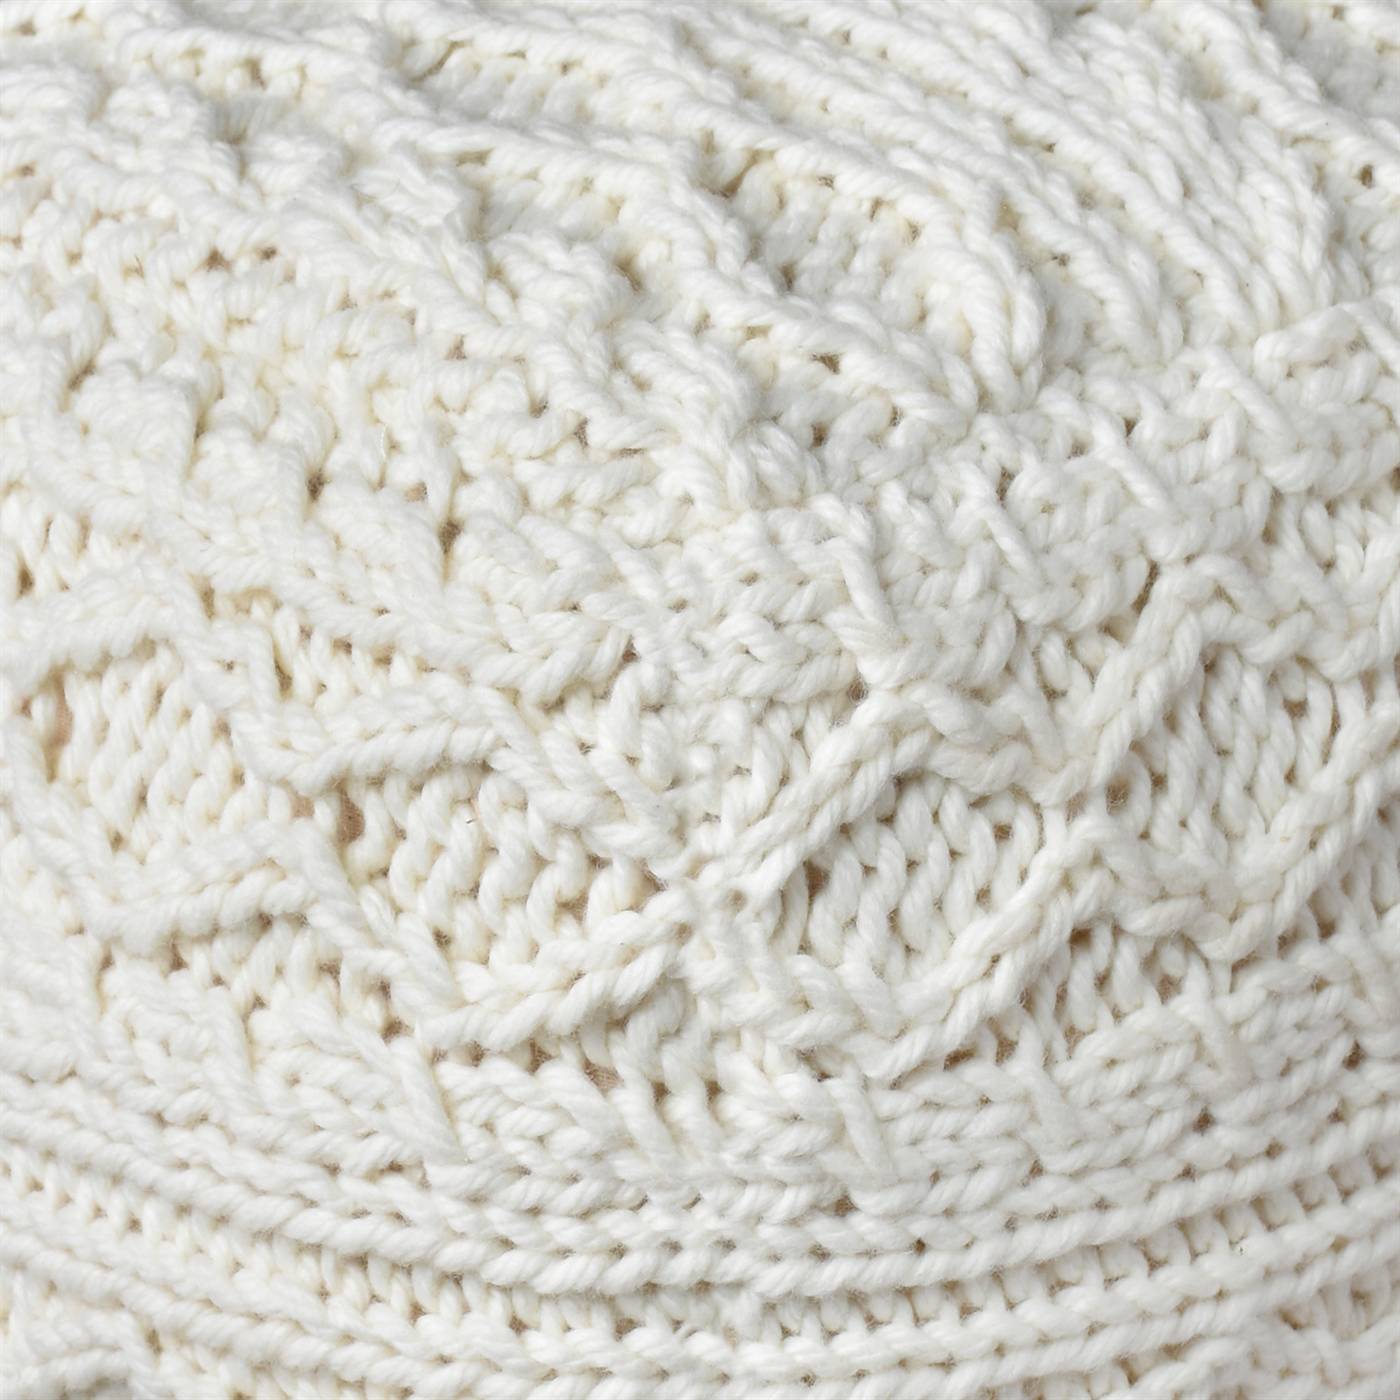 Kaliwa Pouf, 40x40x40 cm, Natural White, NZ Wool, Hand Knitted, Hm Knitted, Flat Weave